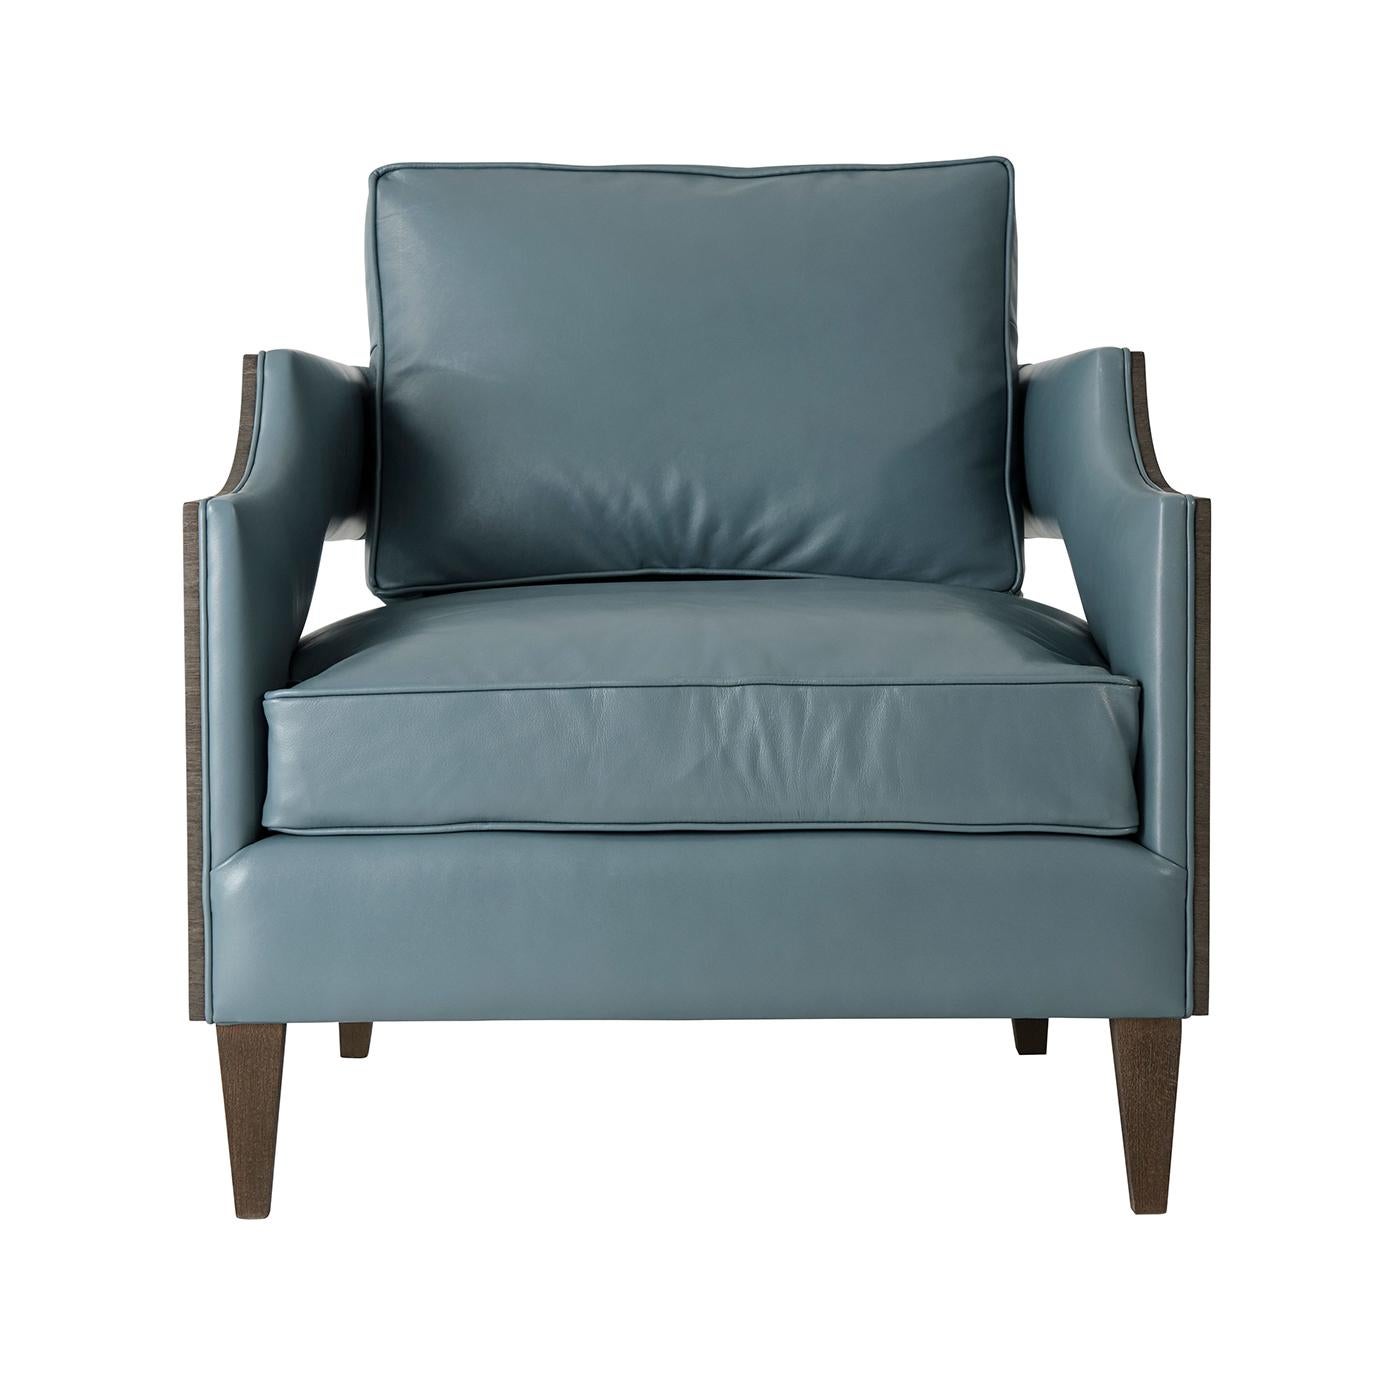 A modern style leather upholstered club chair with loose cushion back and seat with our textured veneer outside frame and square tapered legs.

Dimensions: 31